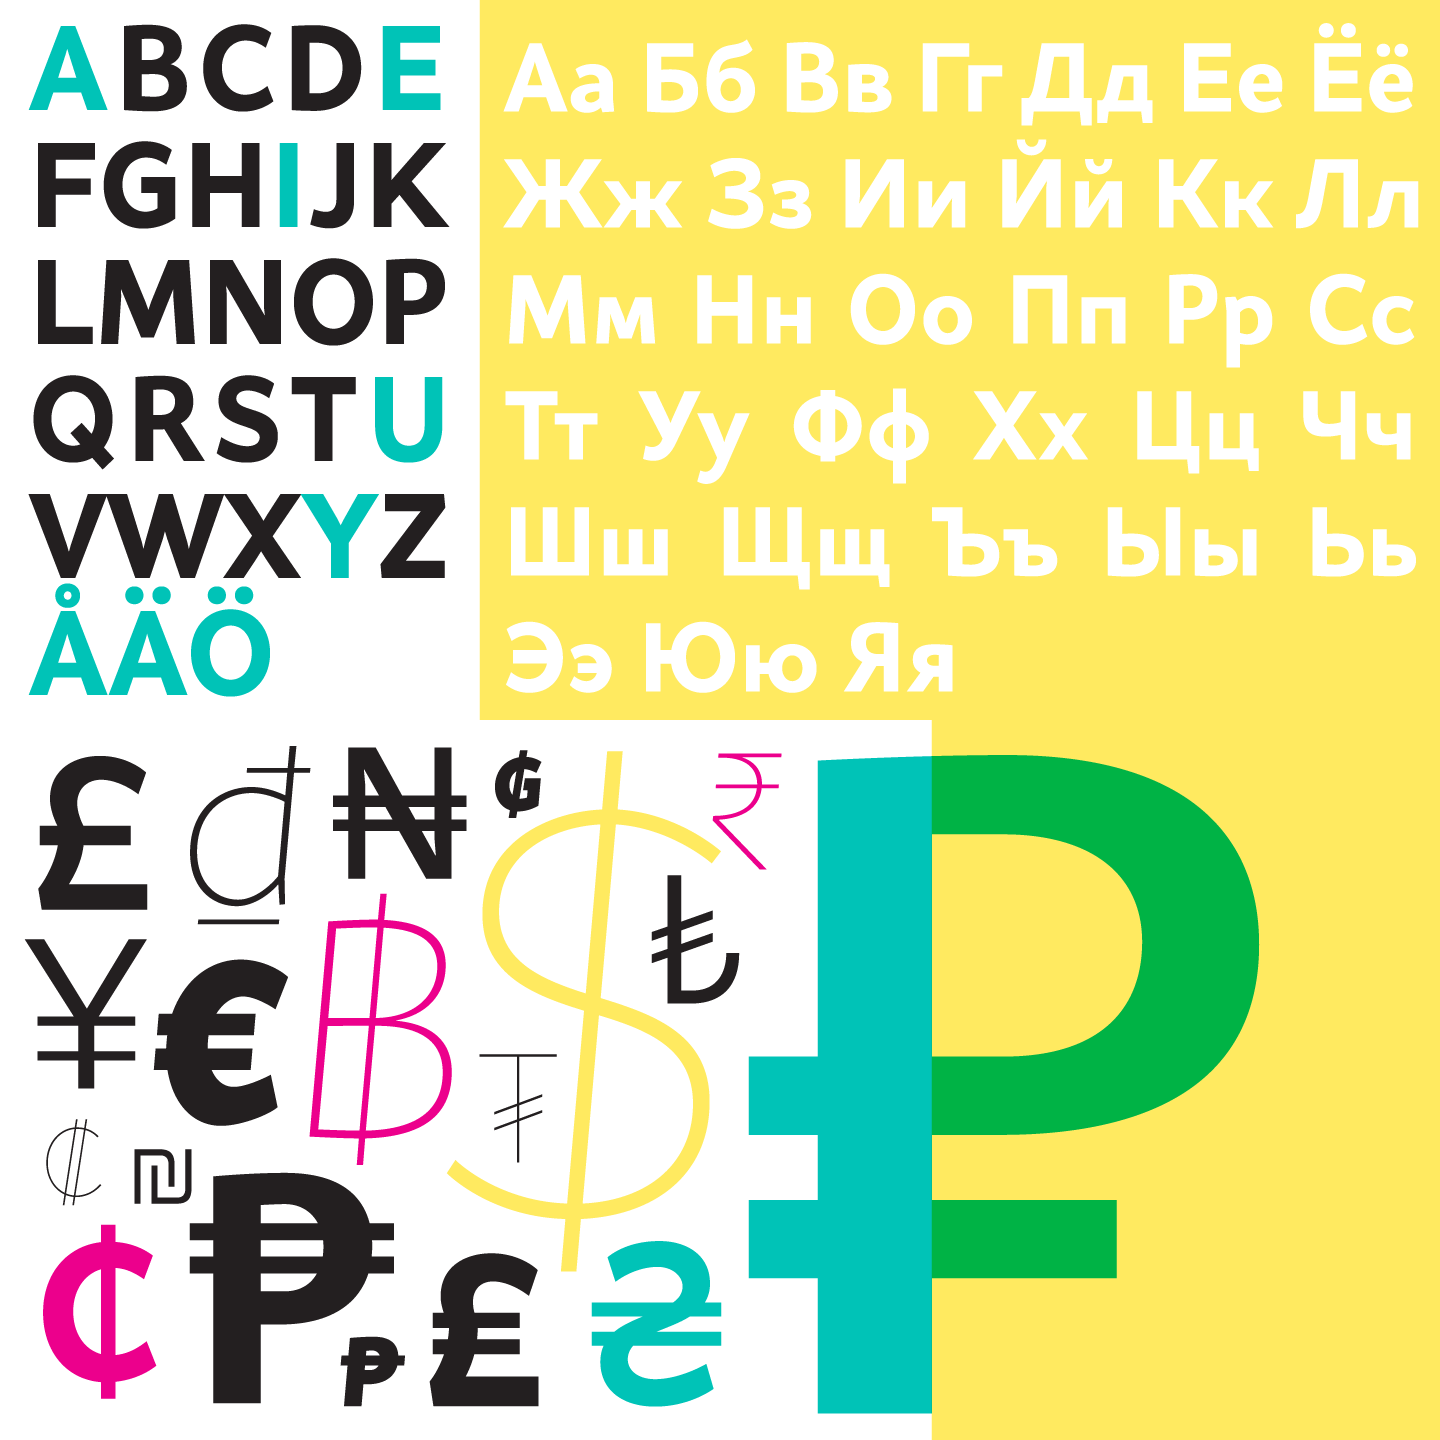 Latin letters vs Cyrillic letters plus special characters.